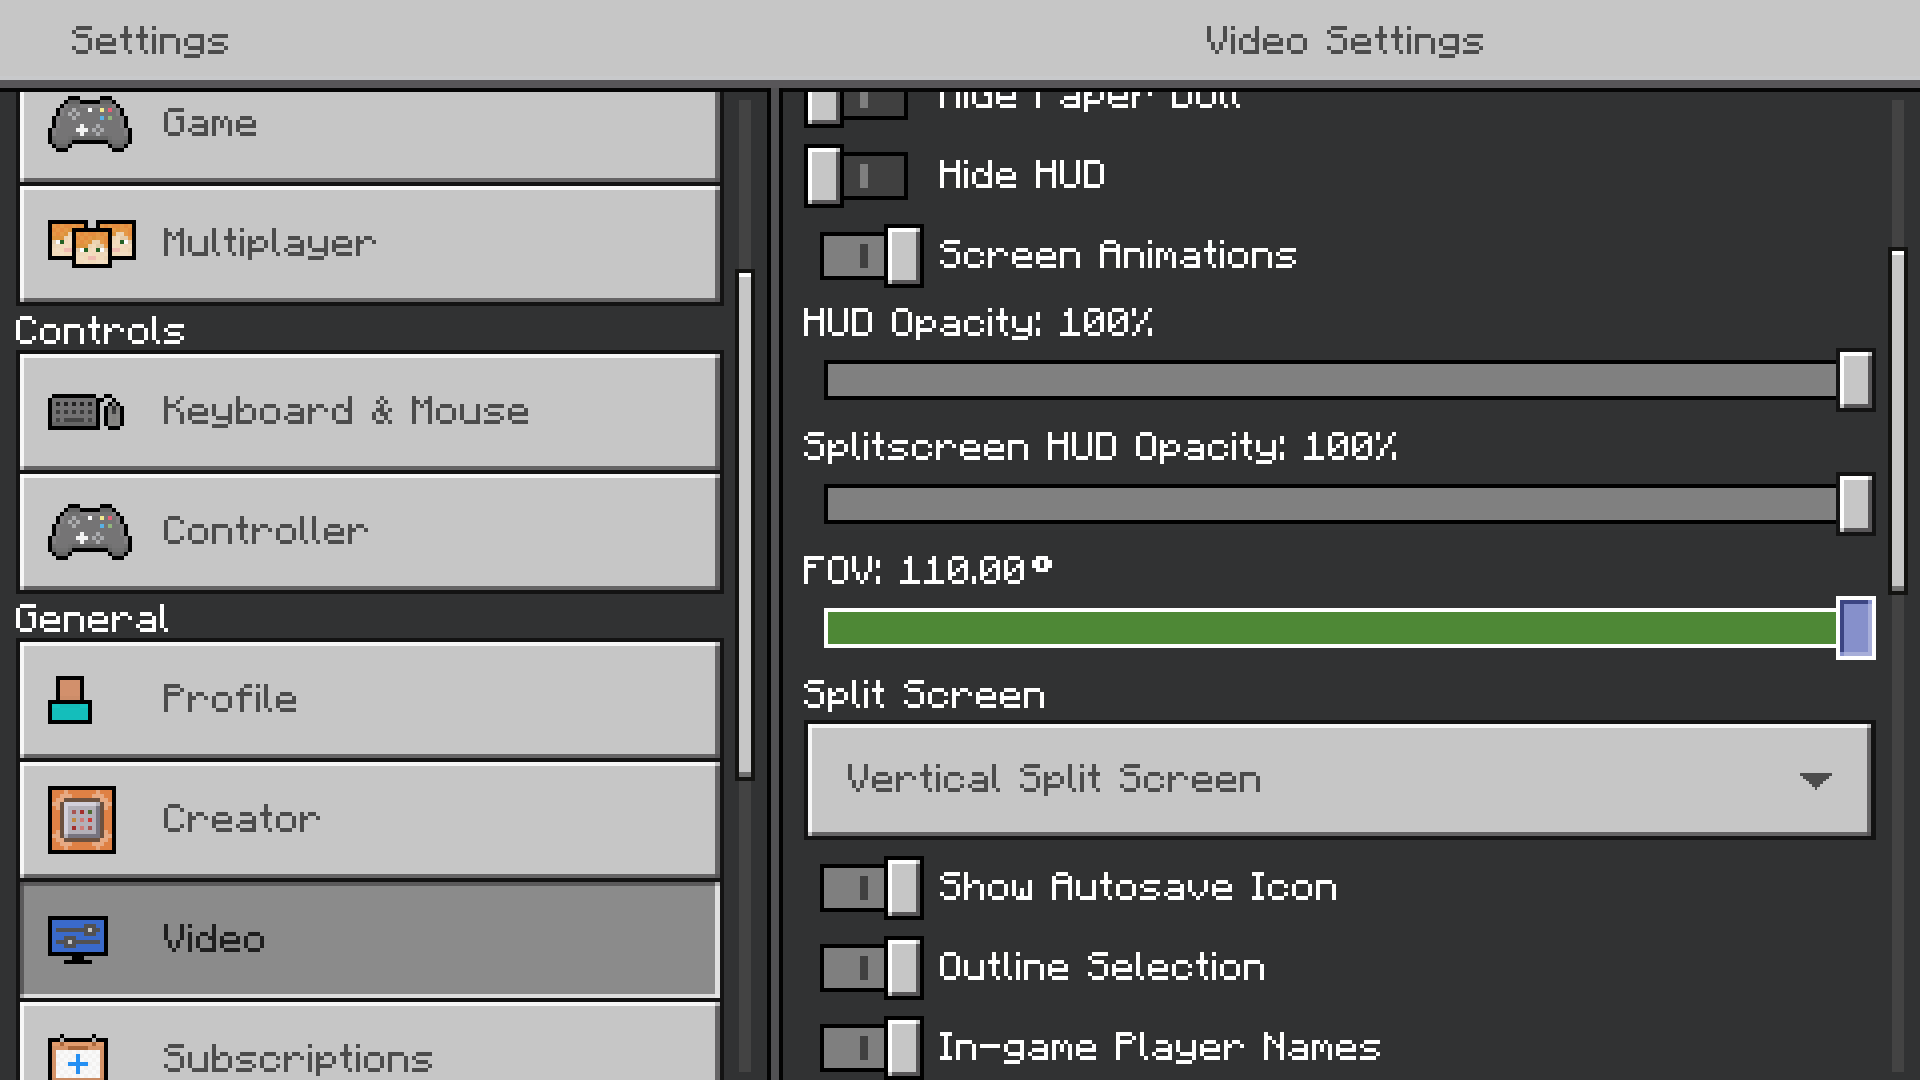 Minecraft screenshot of video settings menu where the focus is on FOV (Field of view) and set to the max of 110 degrees.